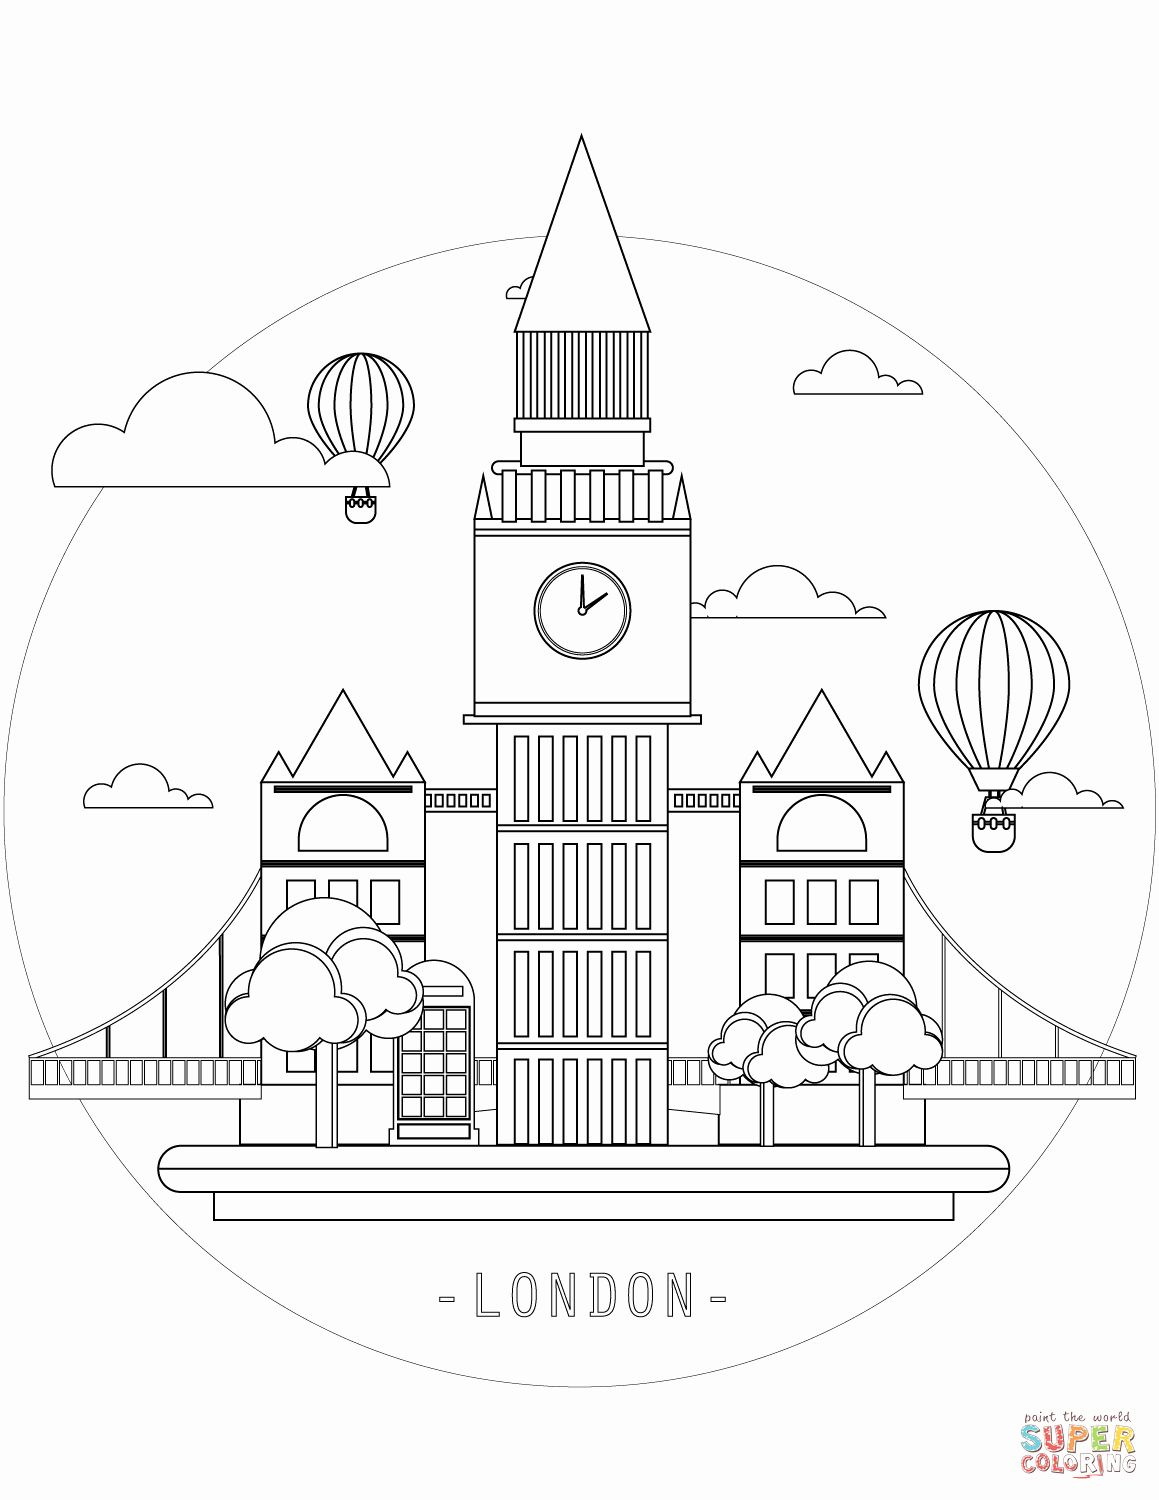 United Kingdom Flag Coloring Page Lovely London Is The Capital Of Great avec Coloriage Drapeau Royaume Uni